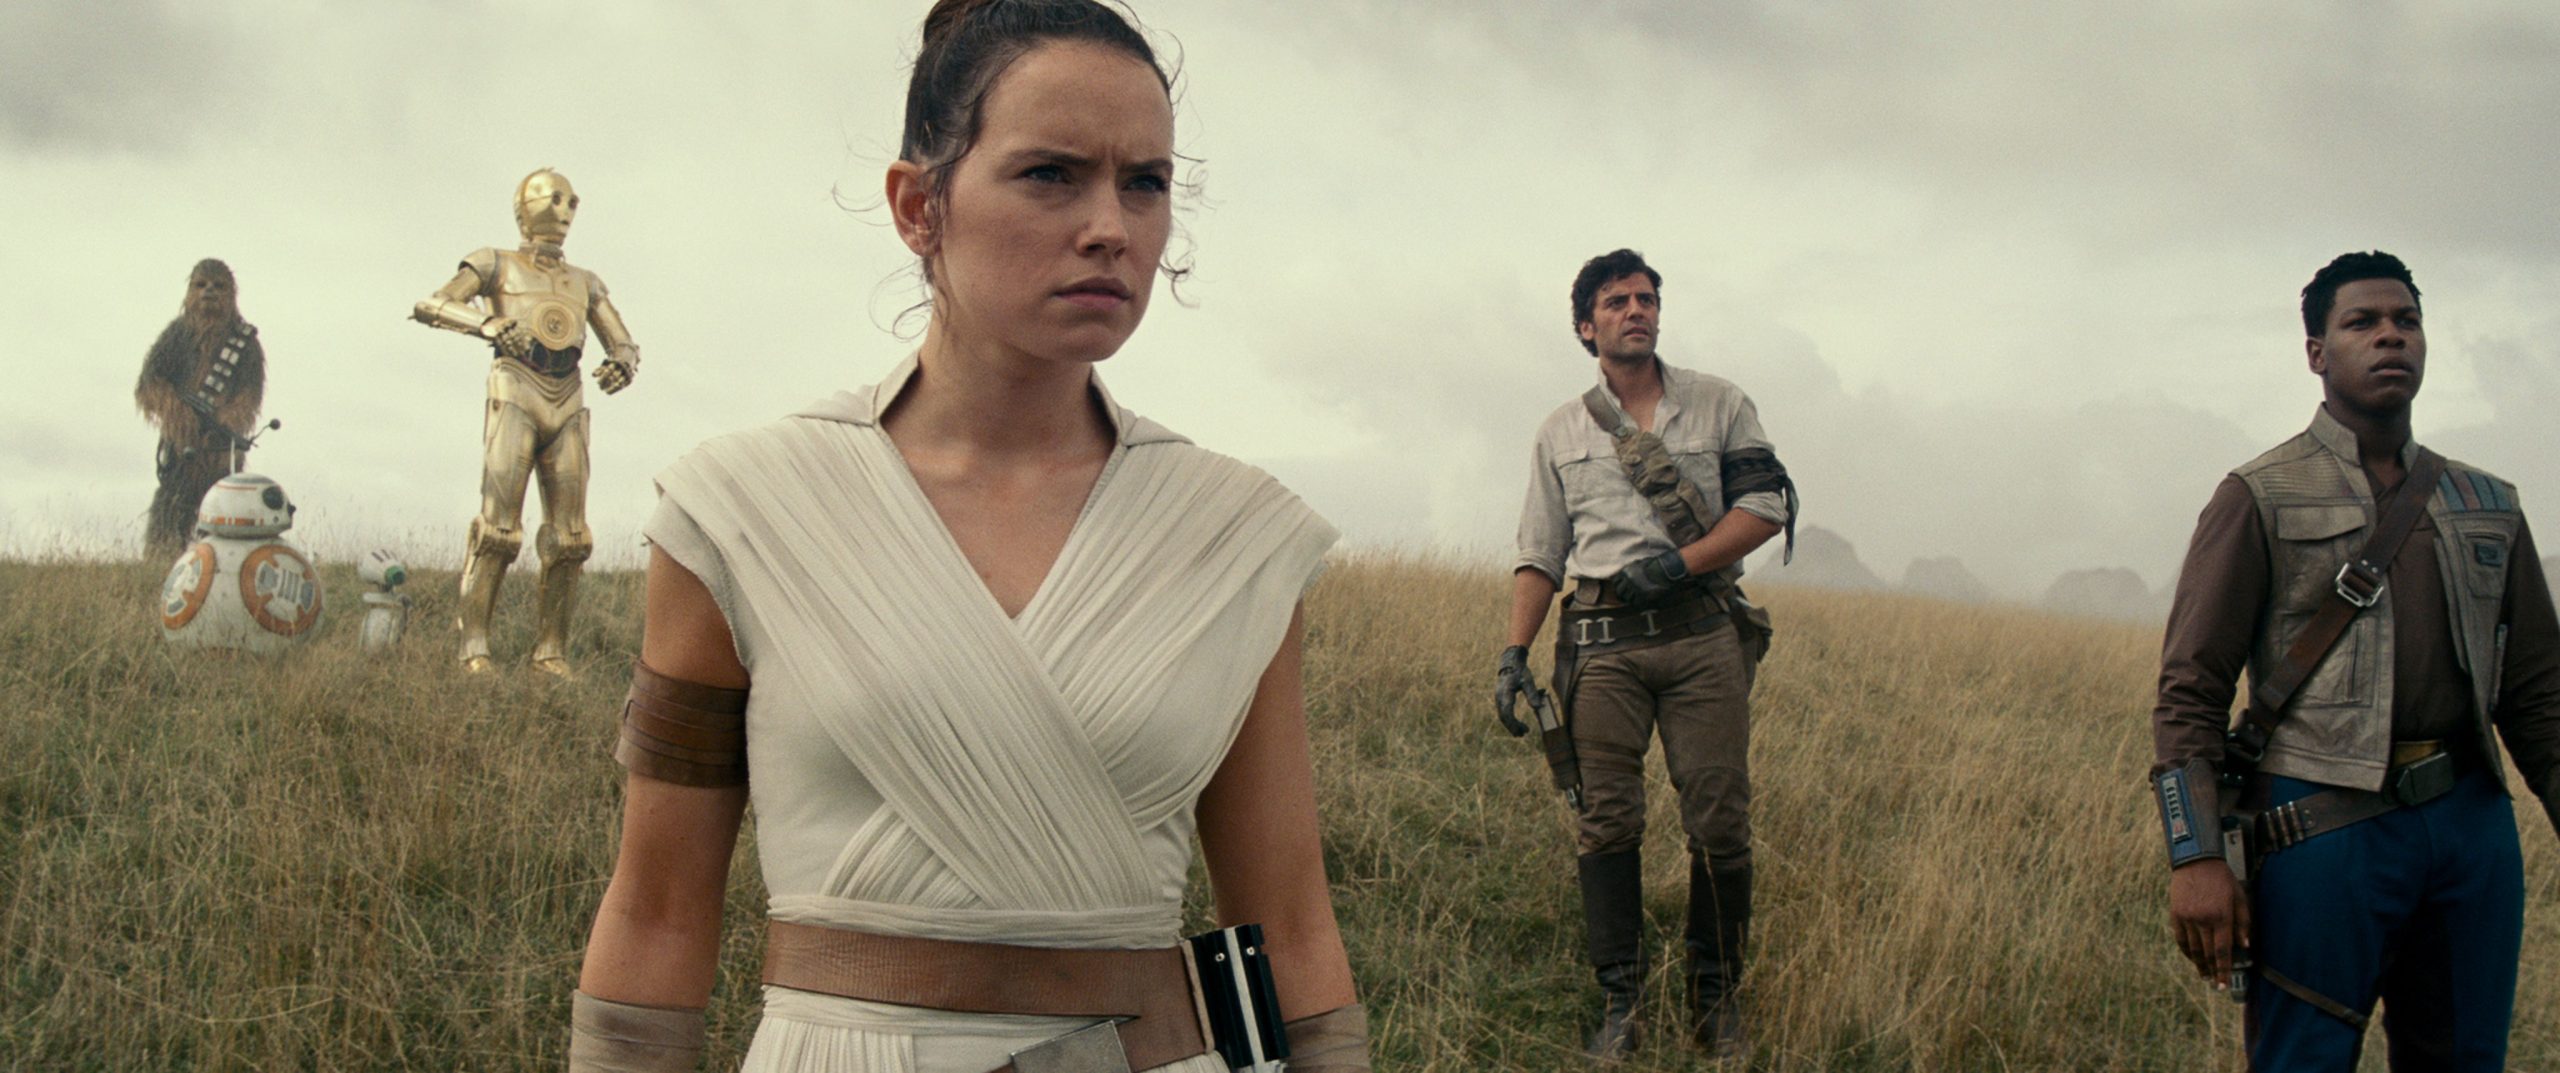 [News] STARS WARS: THE RISE OF SKYWALKER Arriving This March